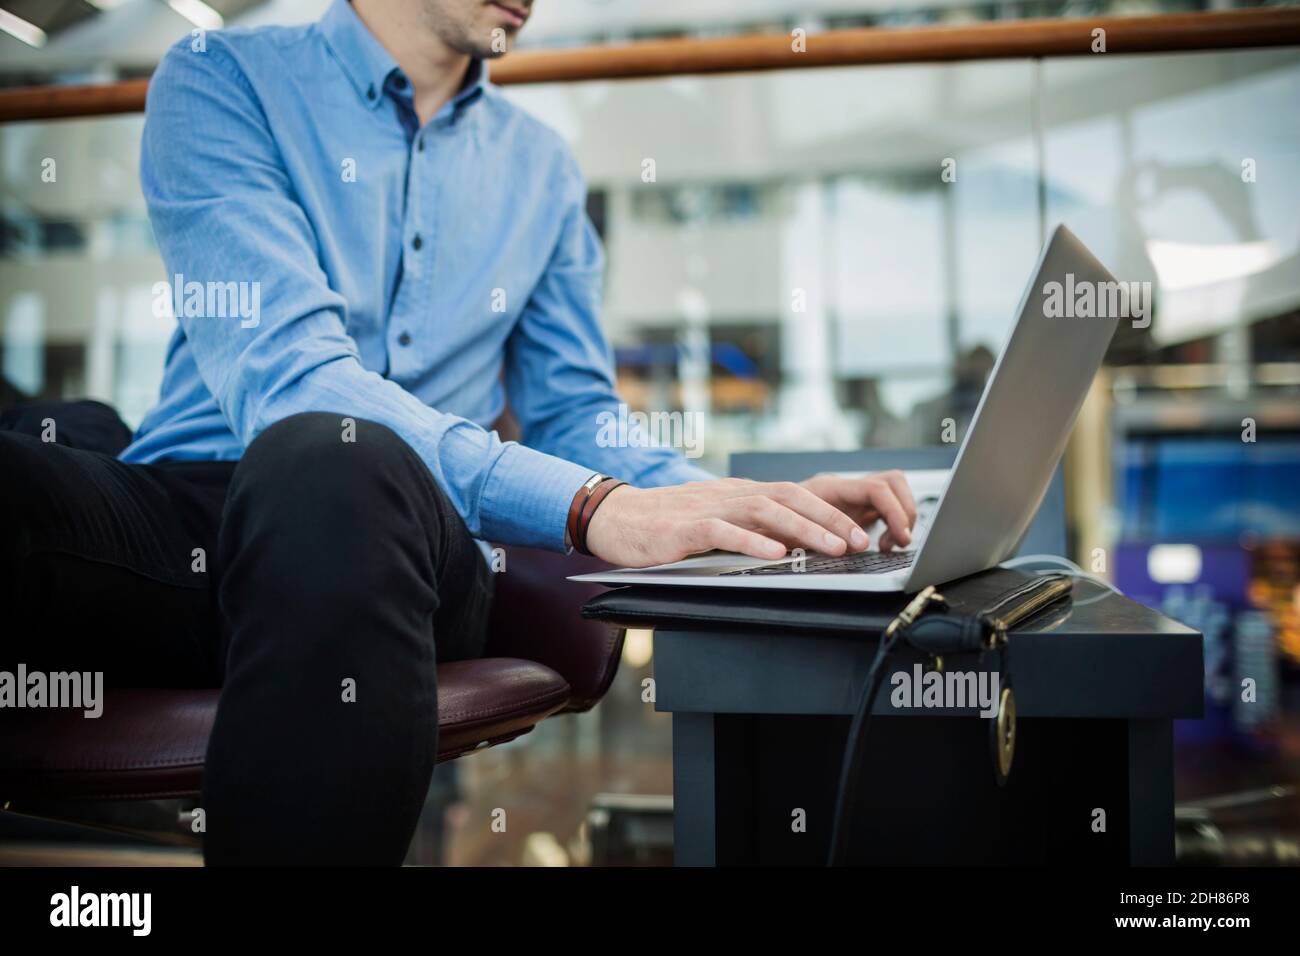 Midsection of businessman using laptop at airport lobby Stock Photo